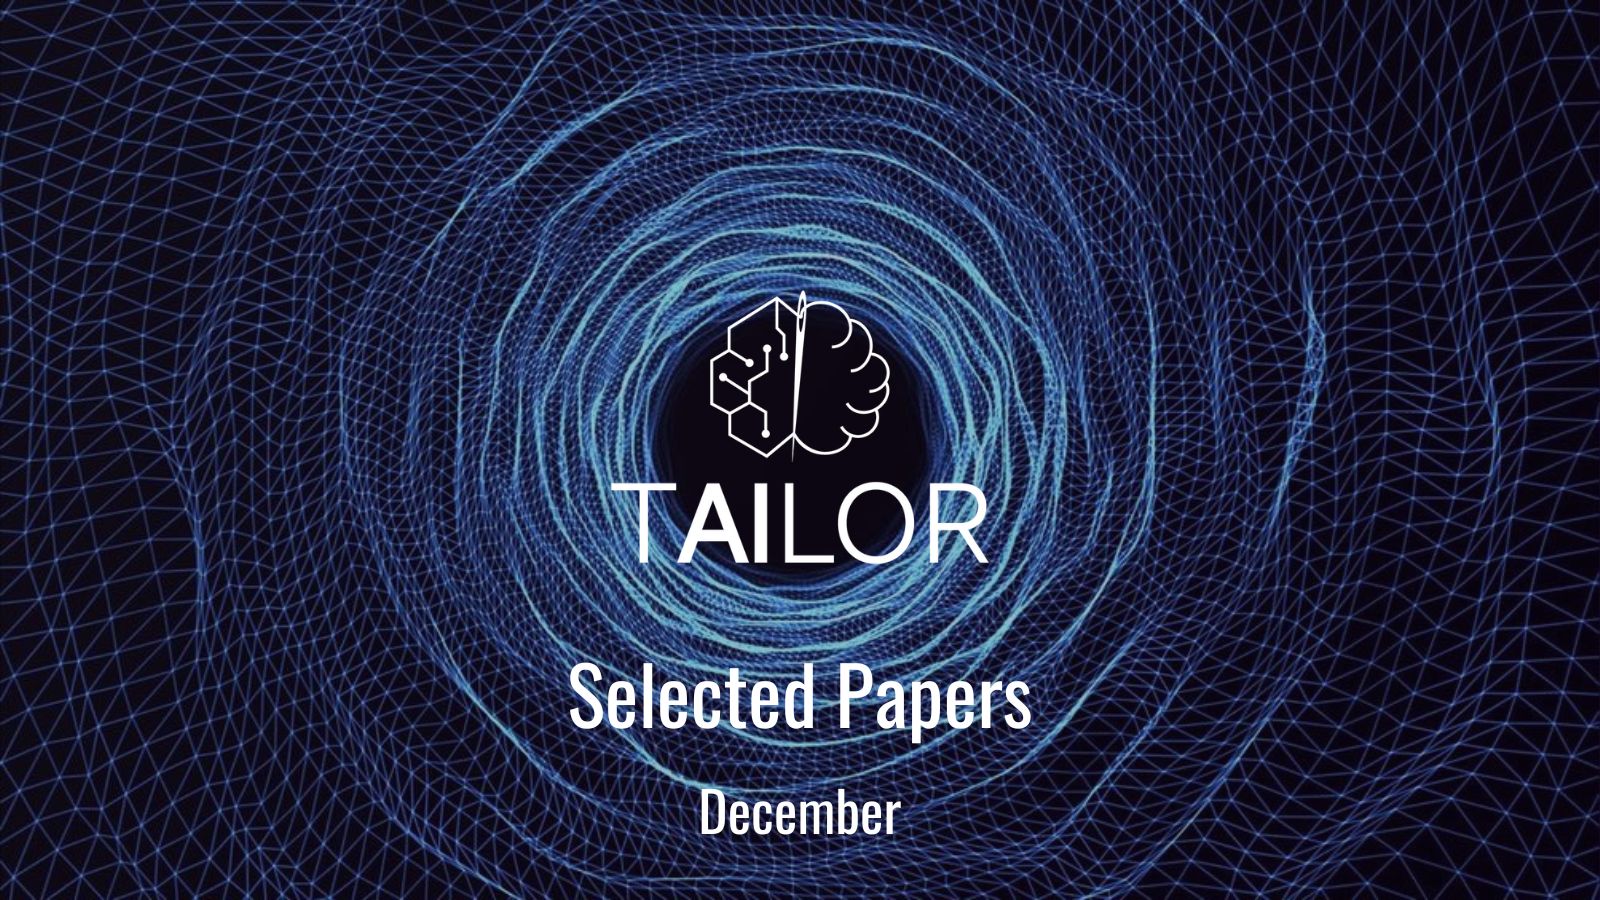 TAILOR Selected Papers: December